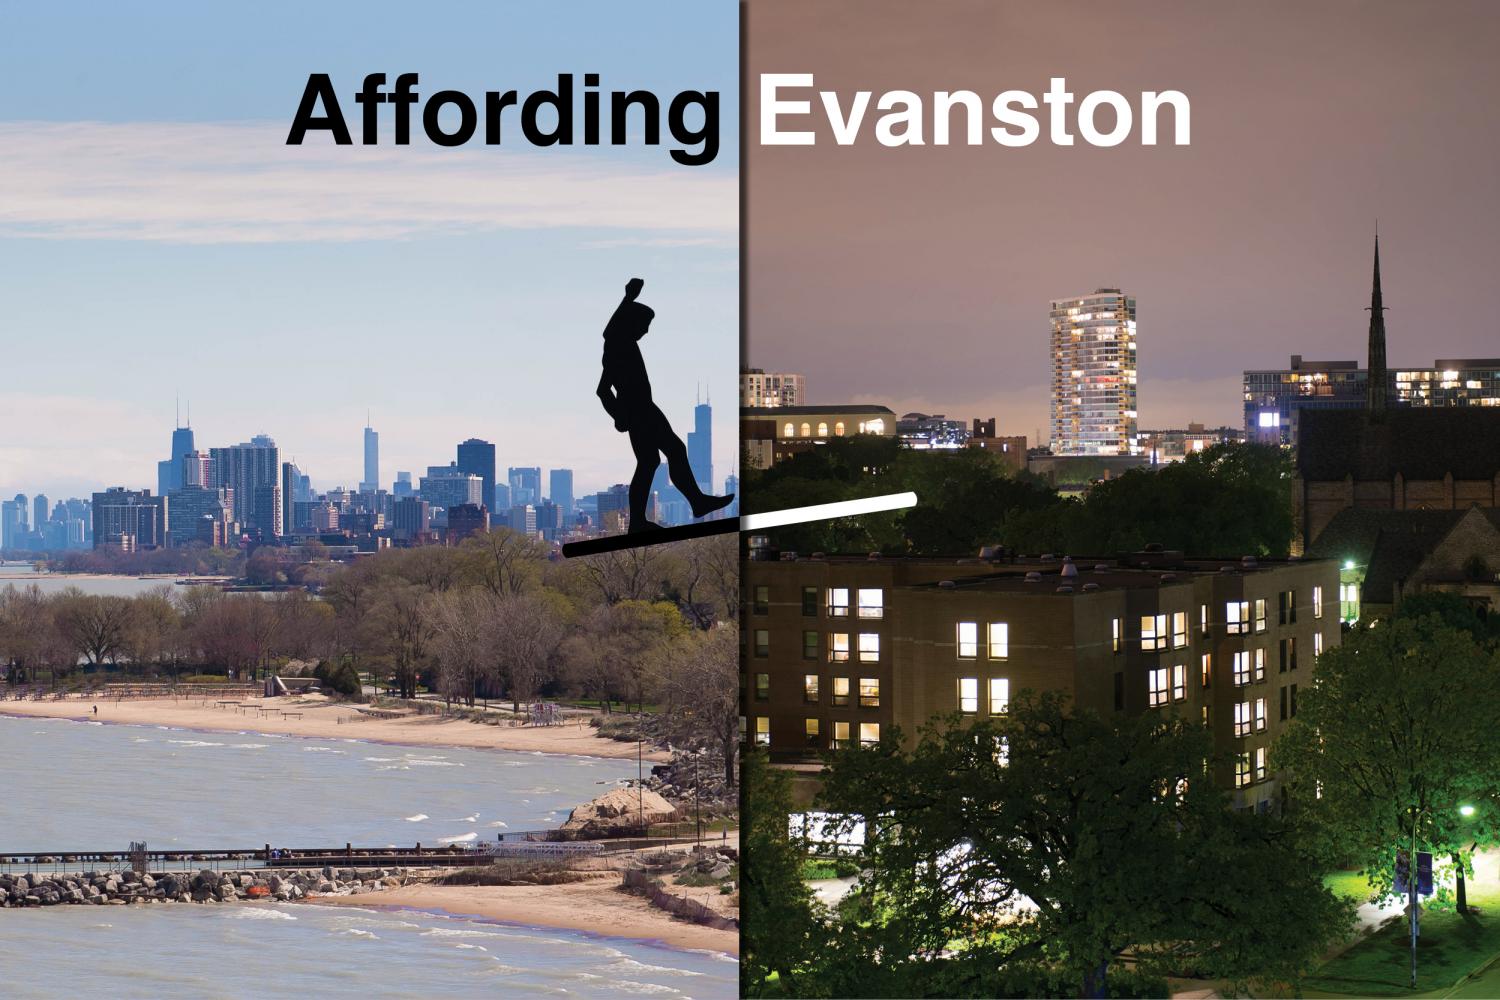 In Focus: As cost of living in Evanston rises, some residents struggle to keep up